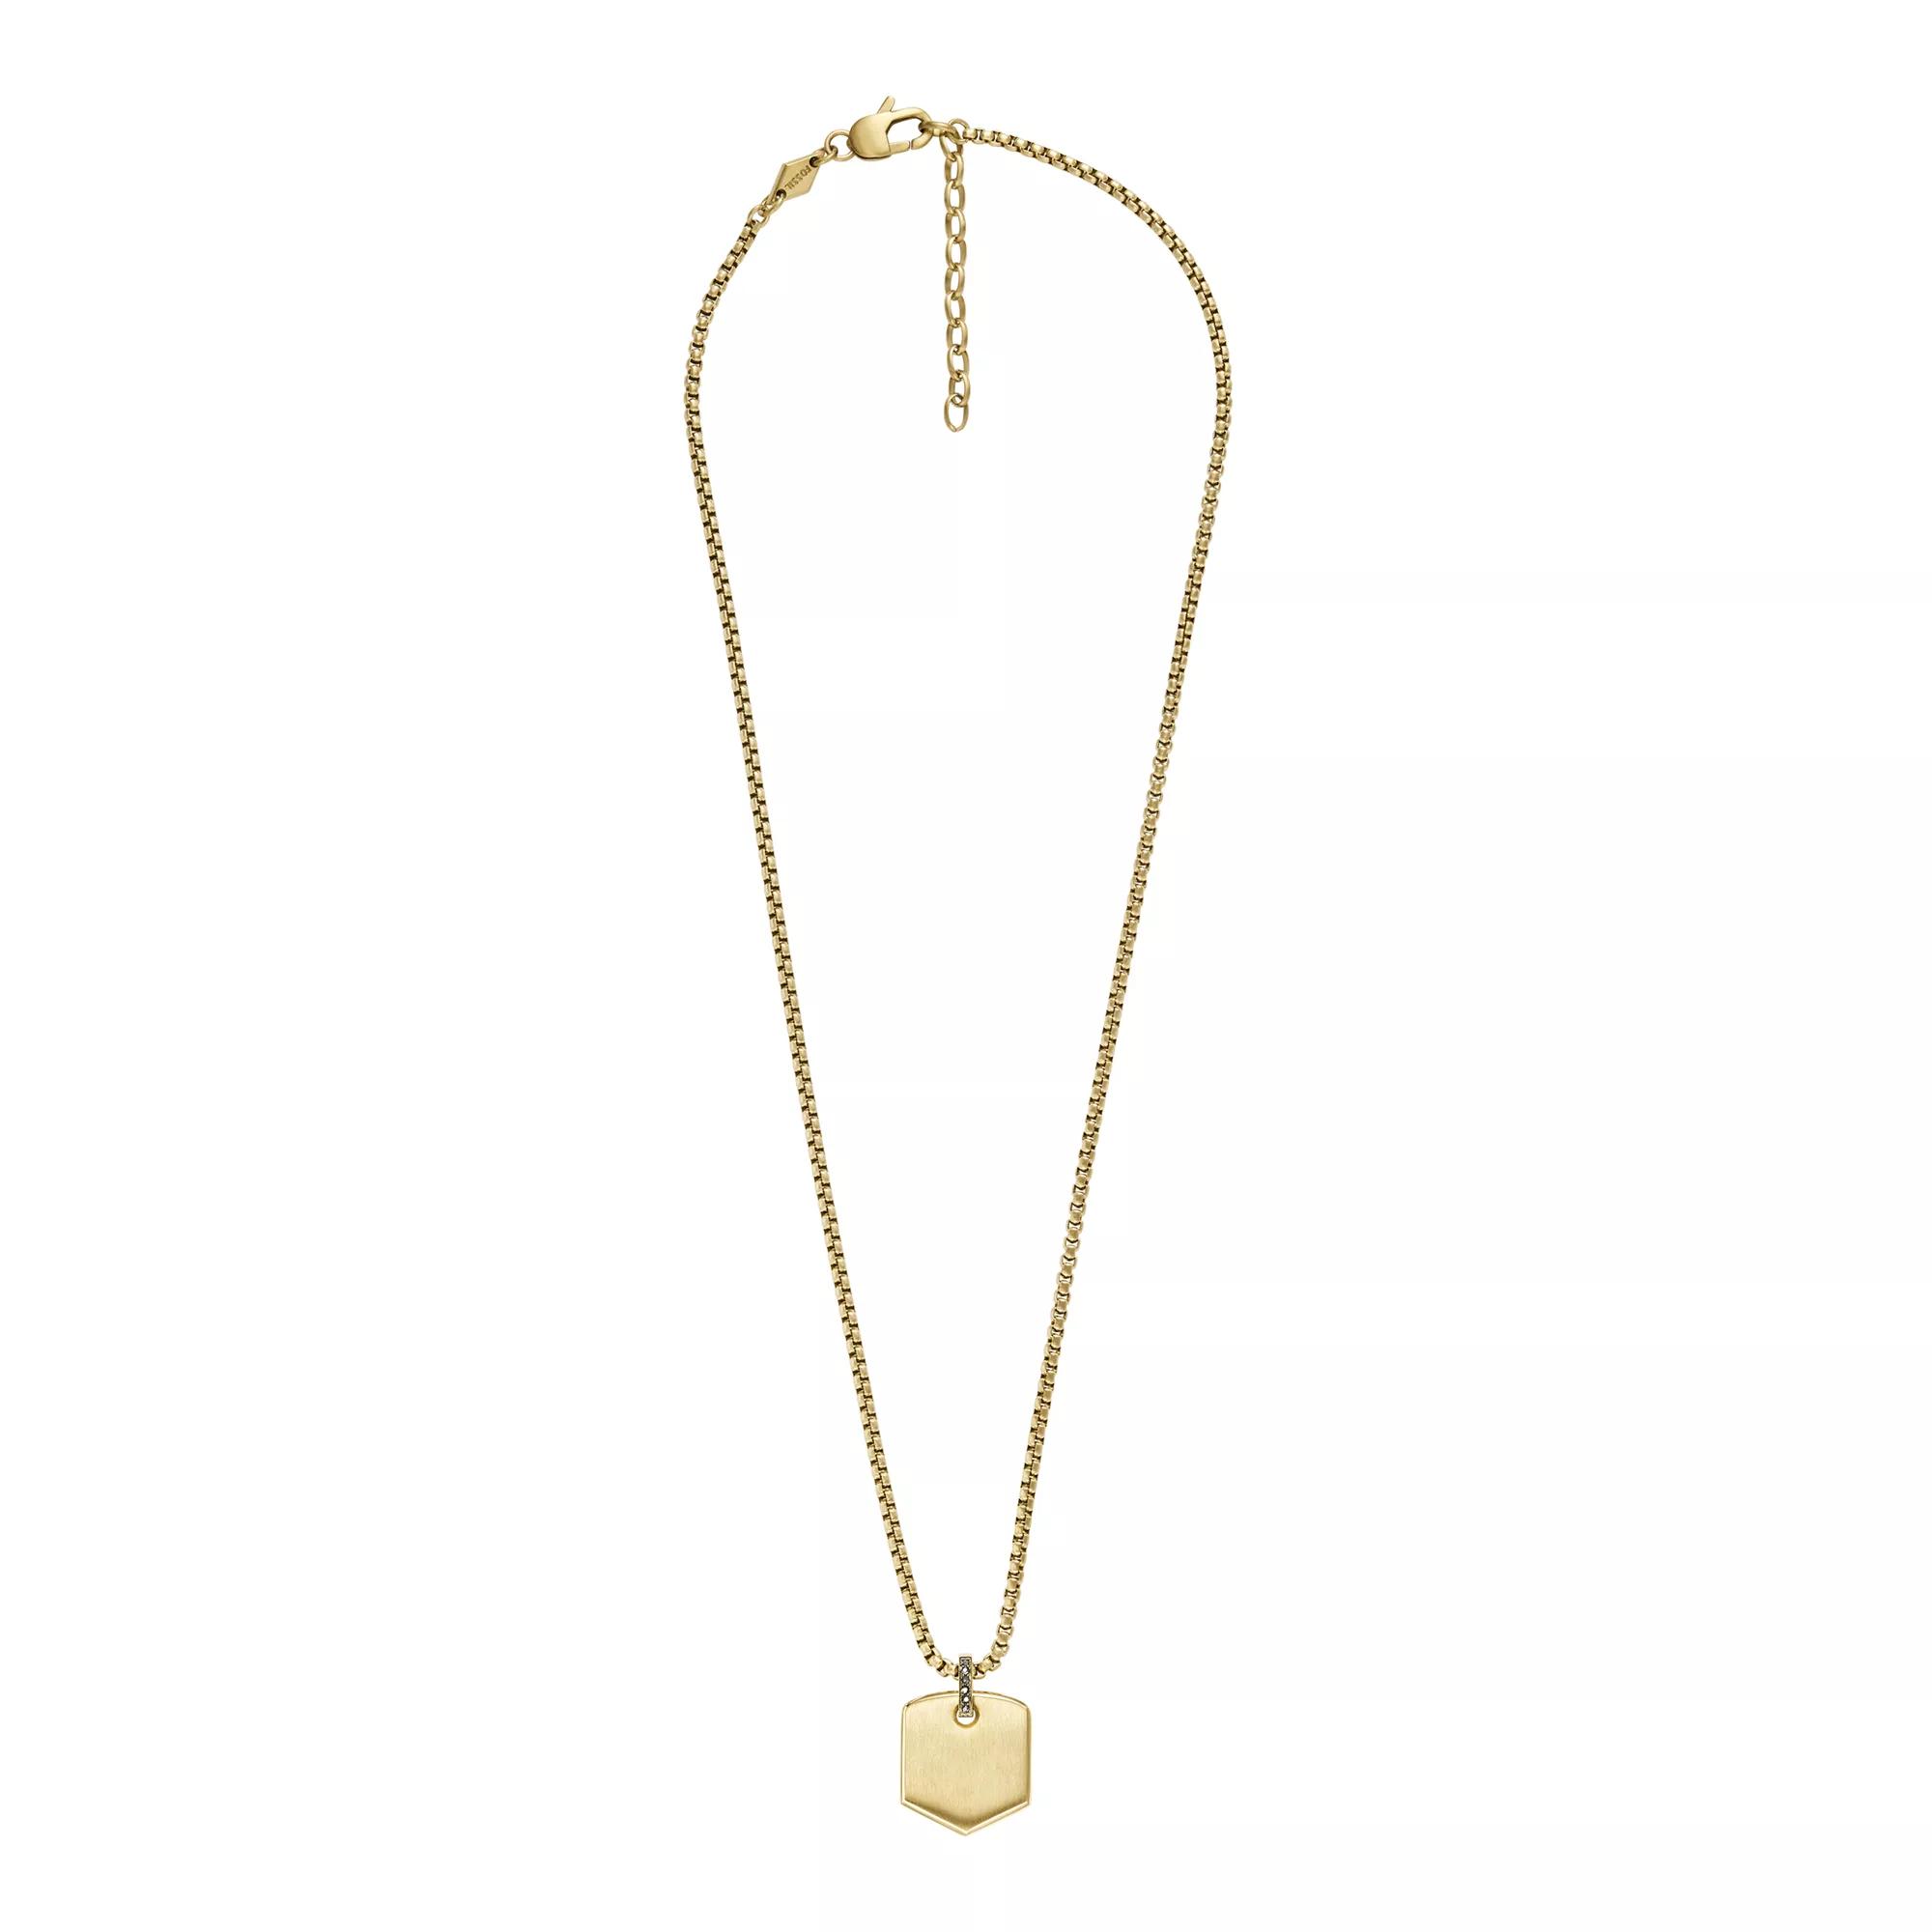 Fossil Heritage Crest Stainless Steel Chain Necklace Gold | Collier moyen